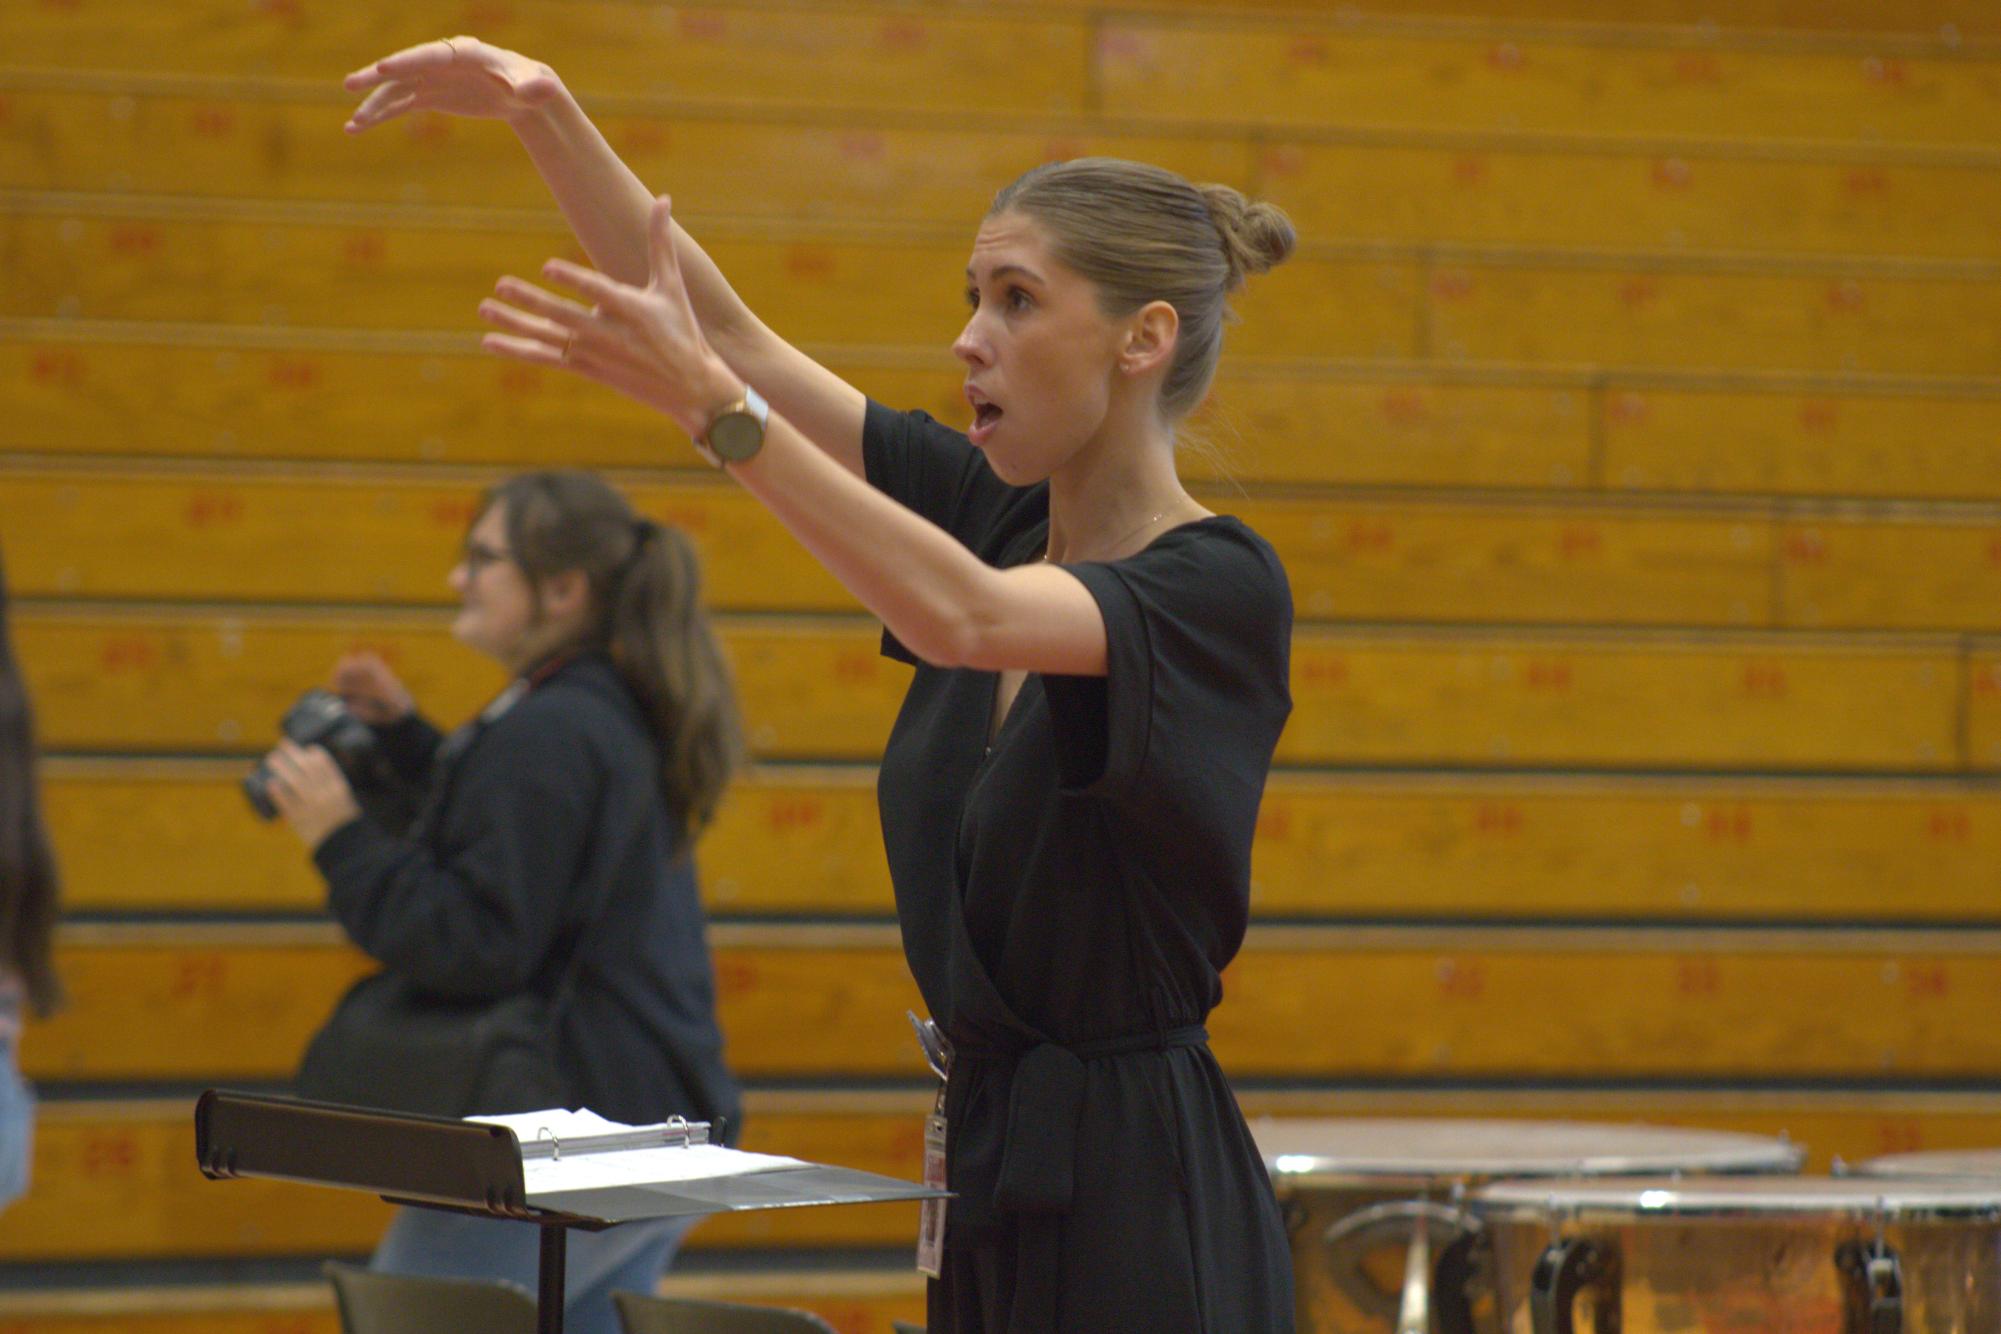 Conducting during the Veterans Day program, choir teacher Emily Brooke keeps the choir on pace during their song.